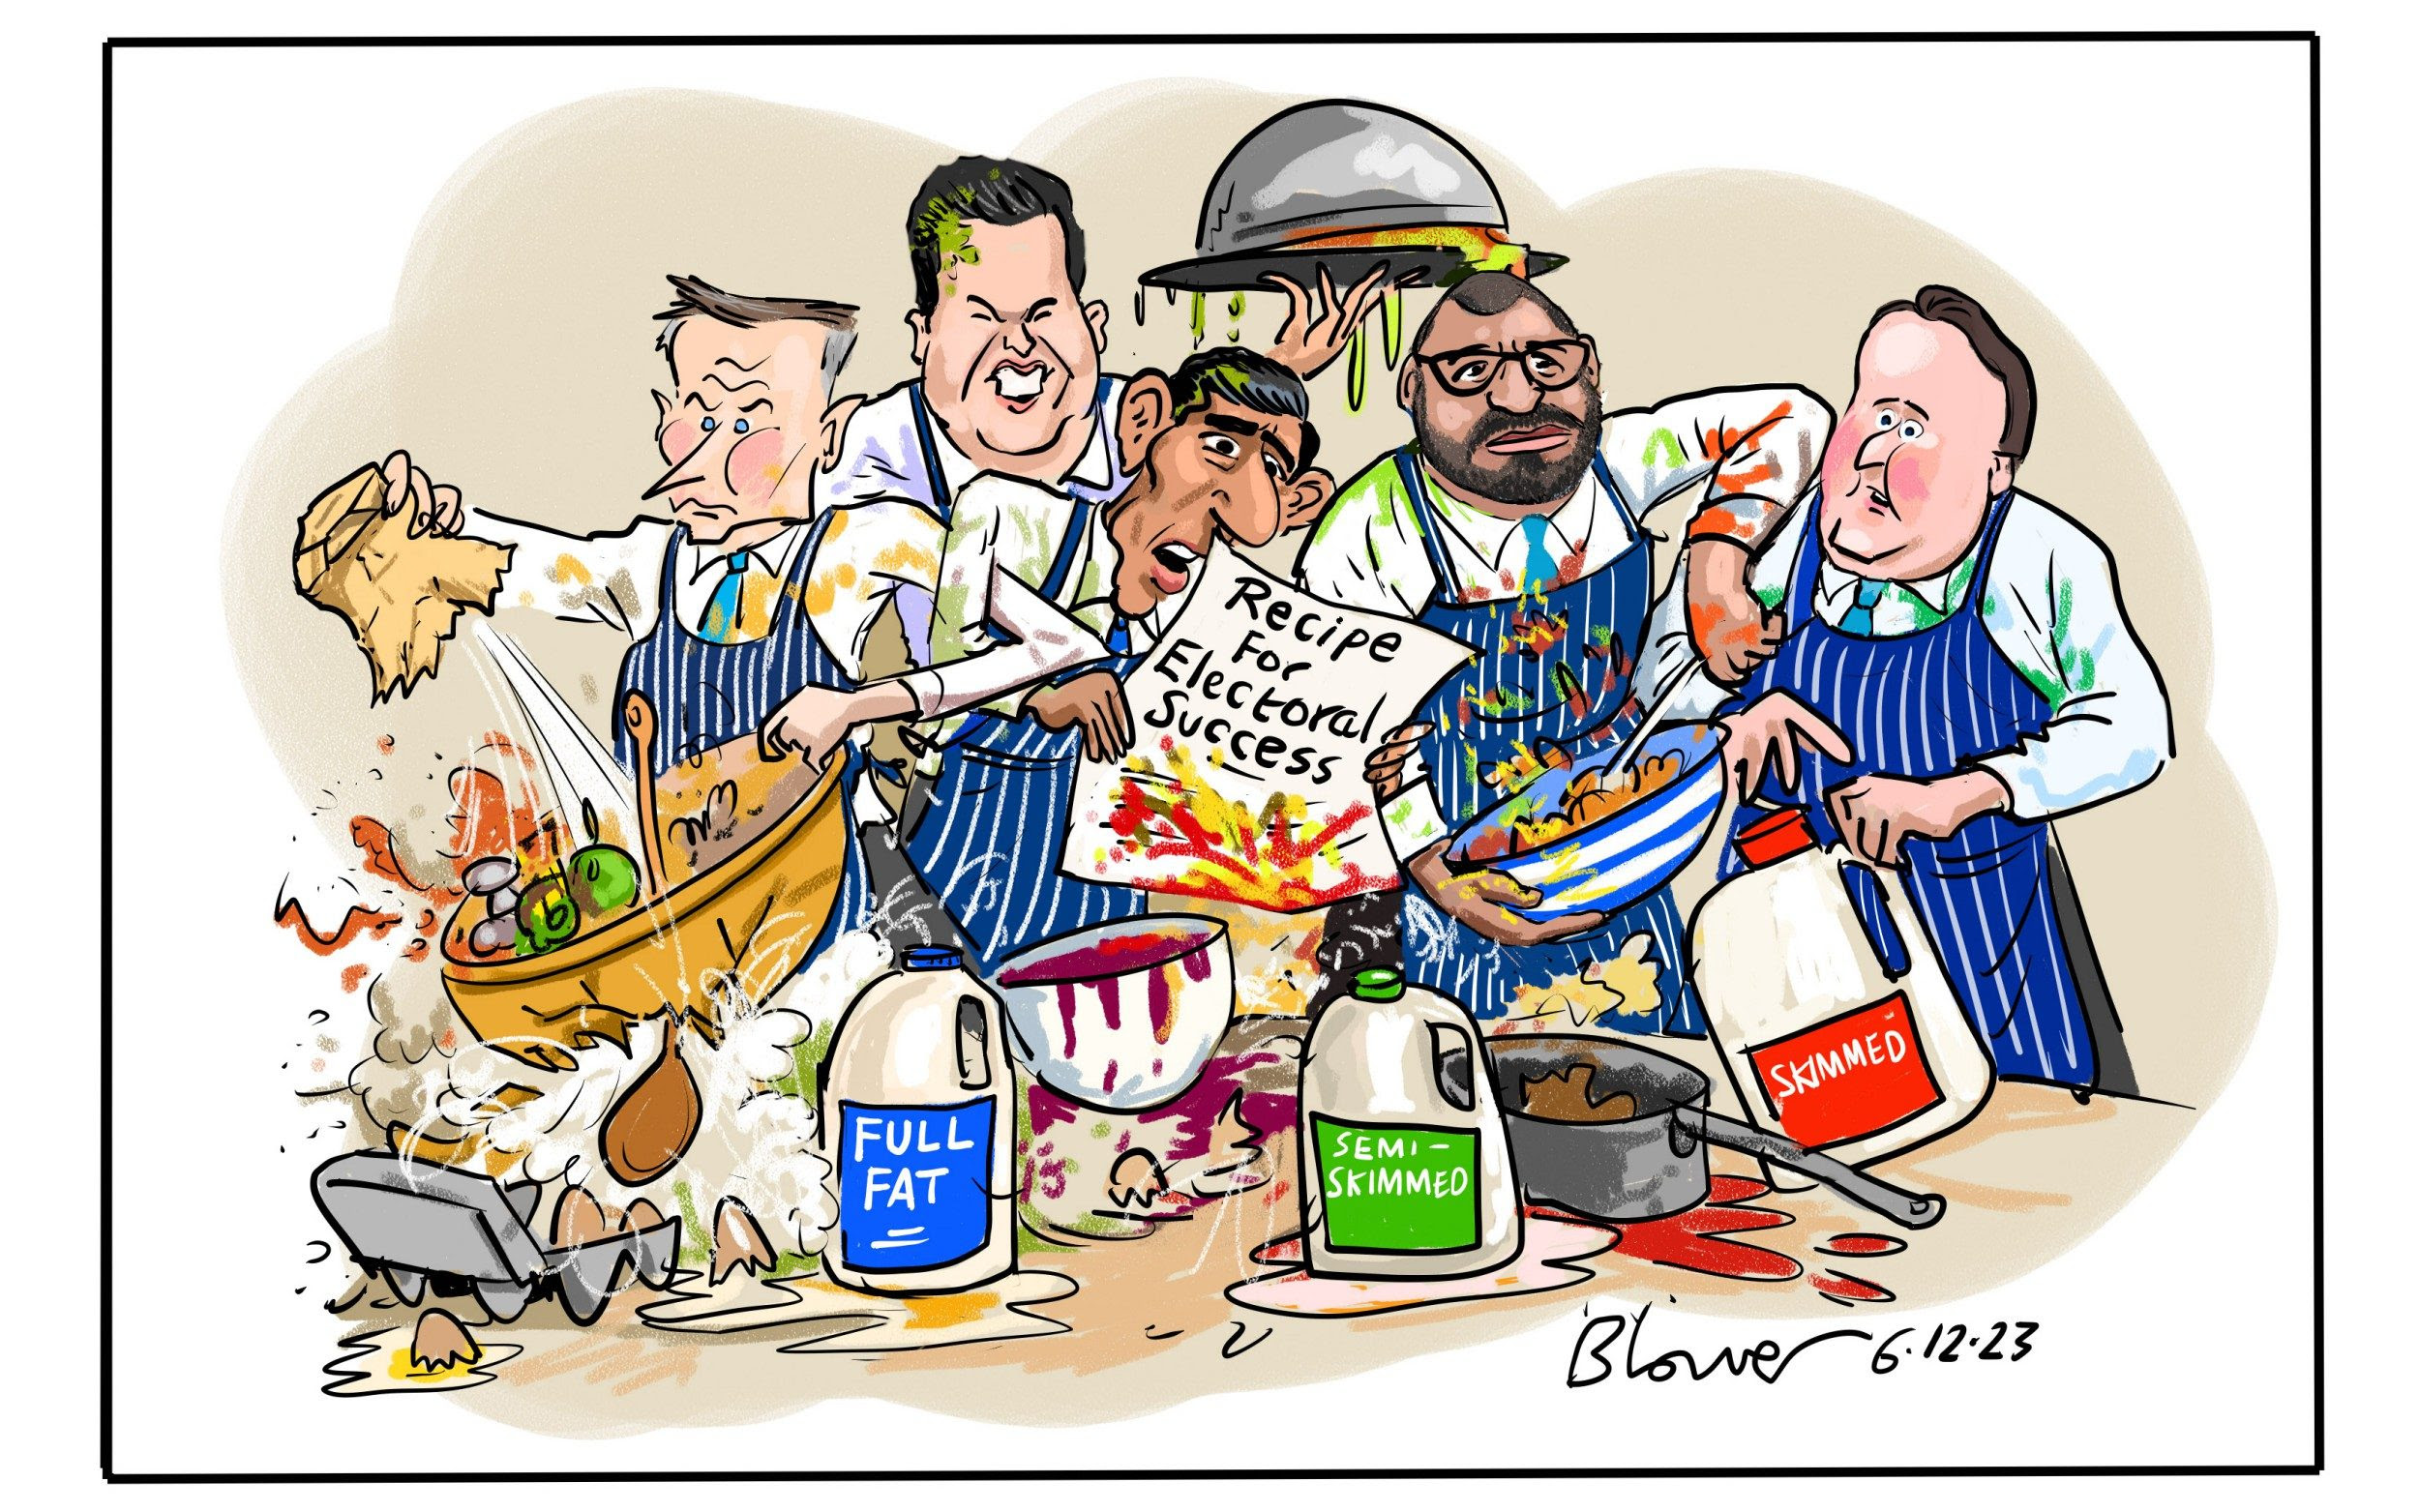 Leading Tories are depicted as chefs creating a 'recipe for electorial success'